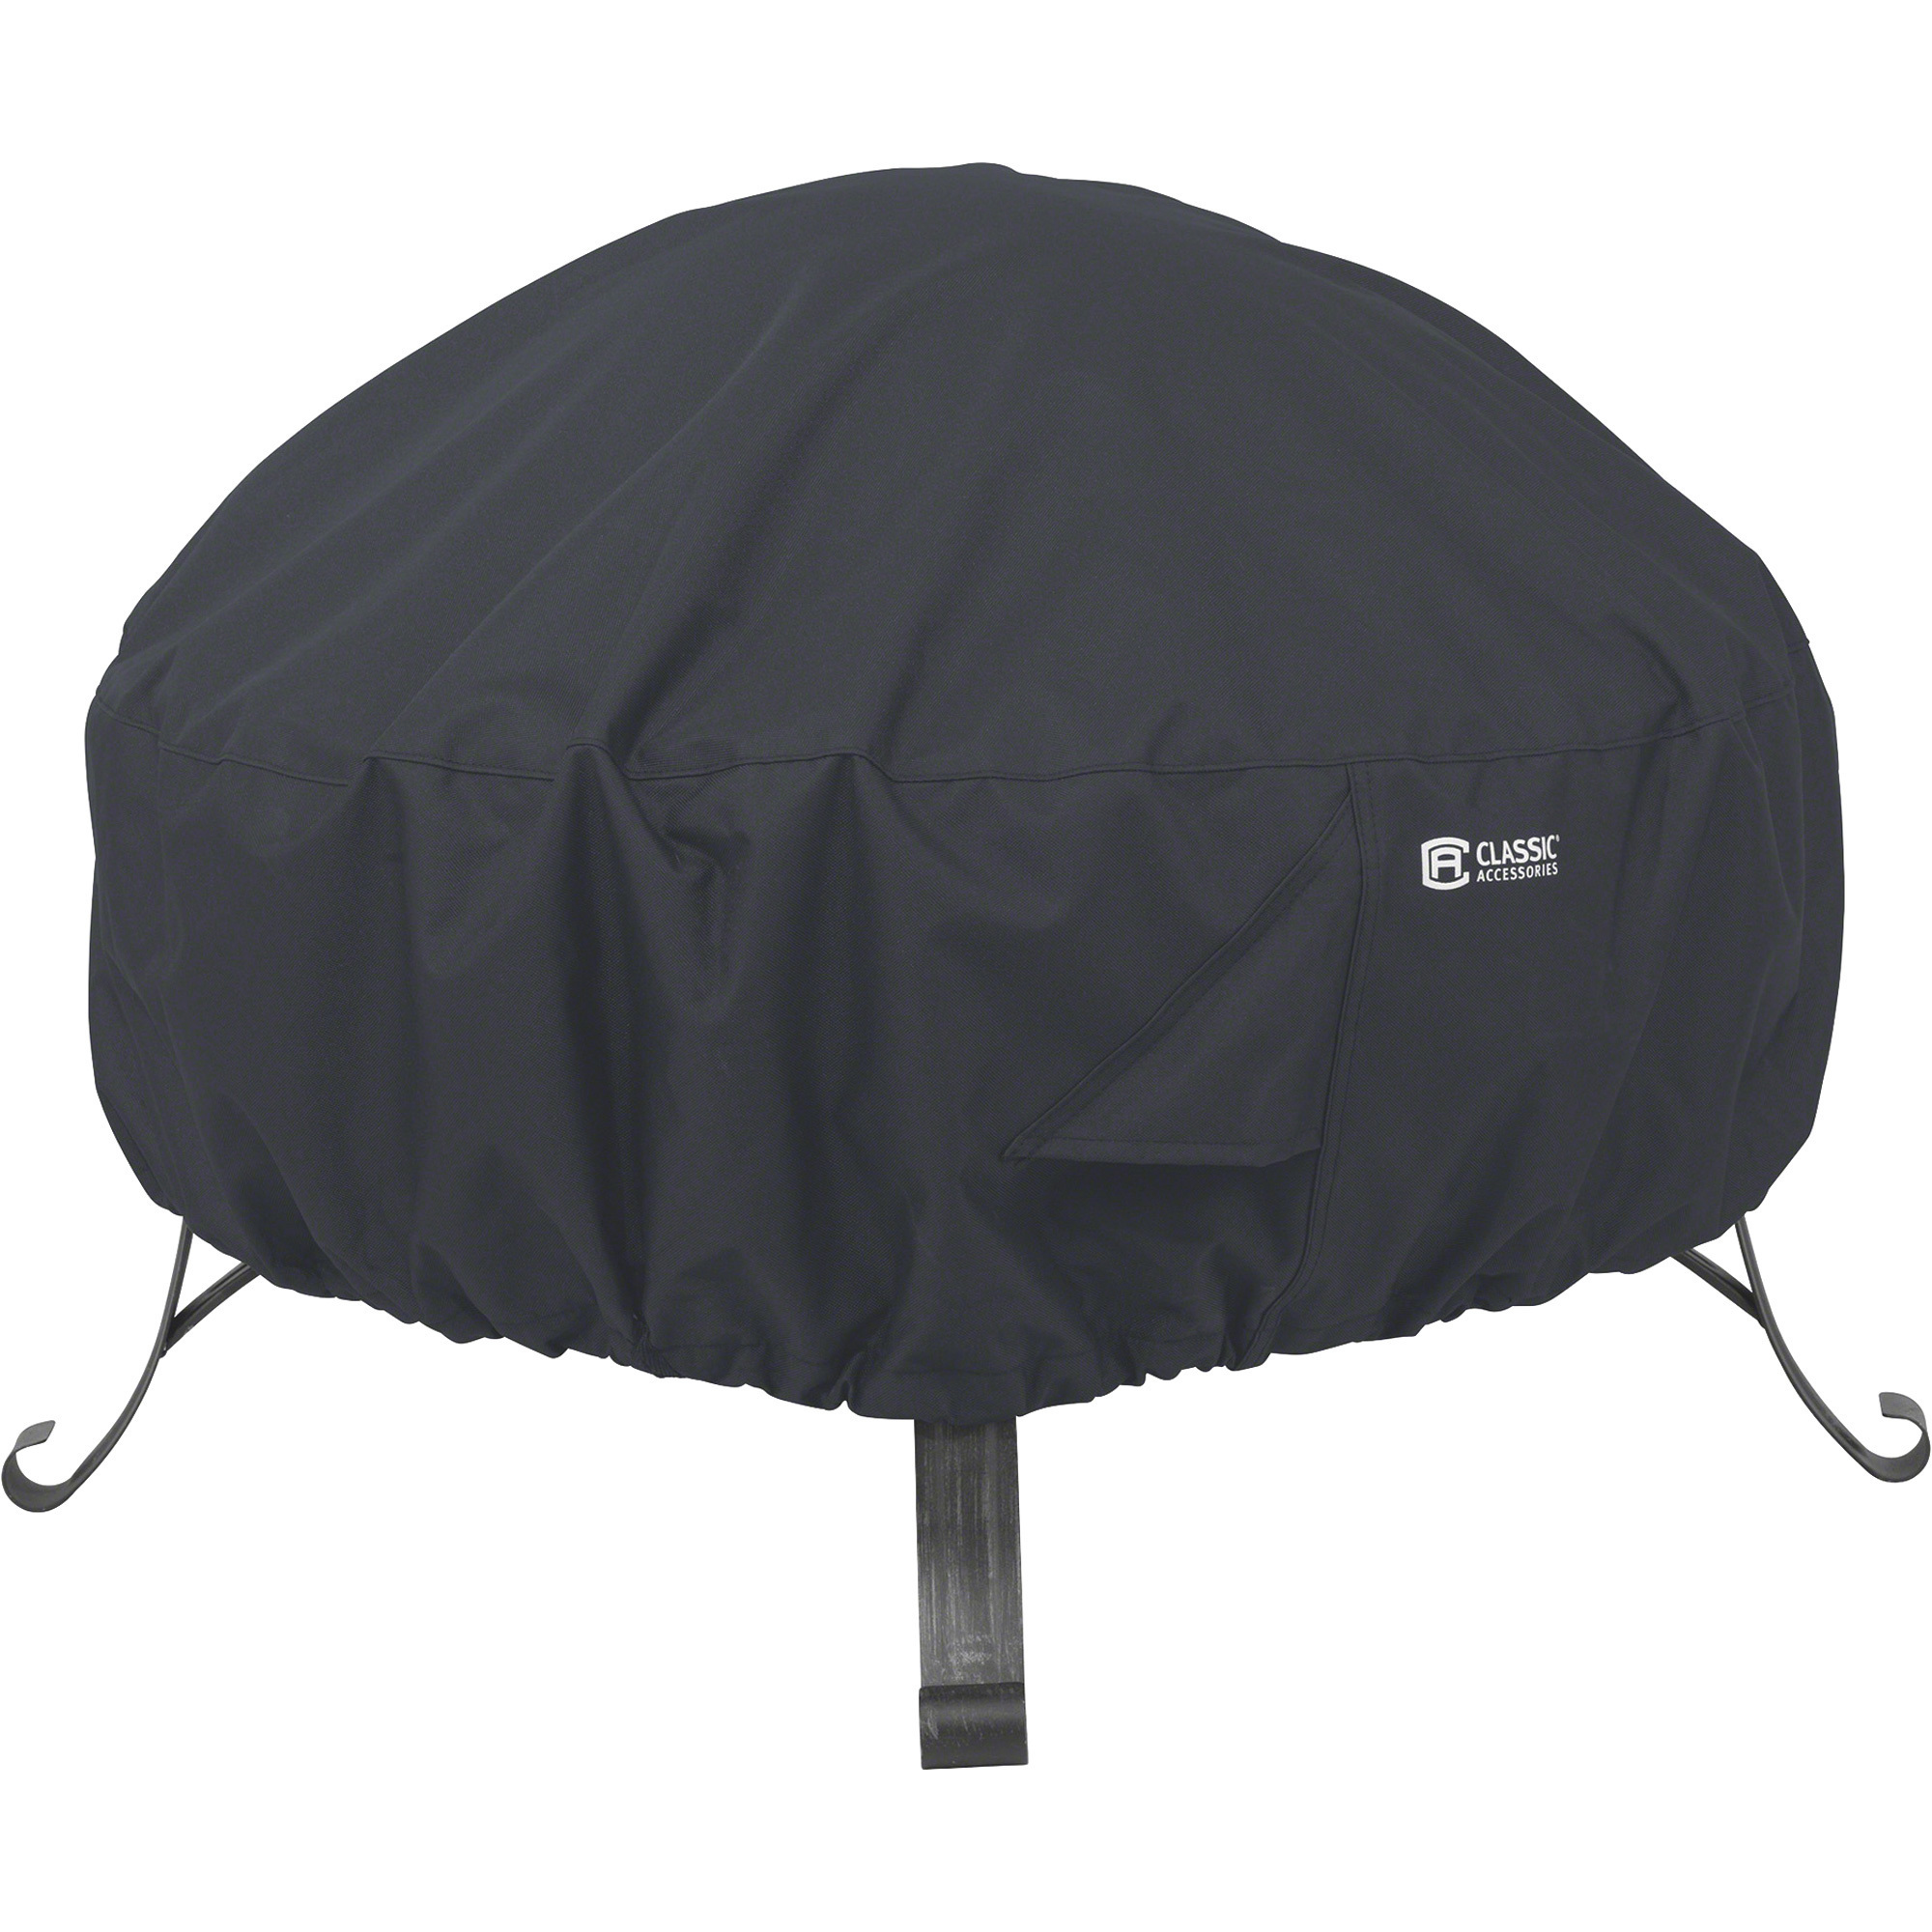 Classic Accessories Fire Pit Cover, Round, Black, Fits 36Inch Diameter x 12Inch H Fire Pit, Model 55-552-010401-00